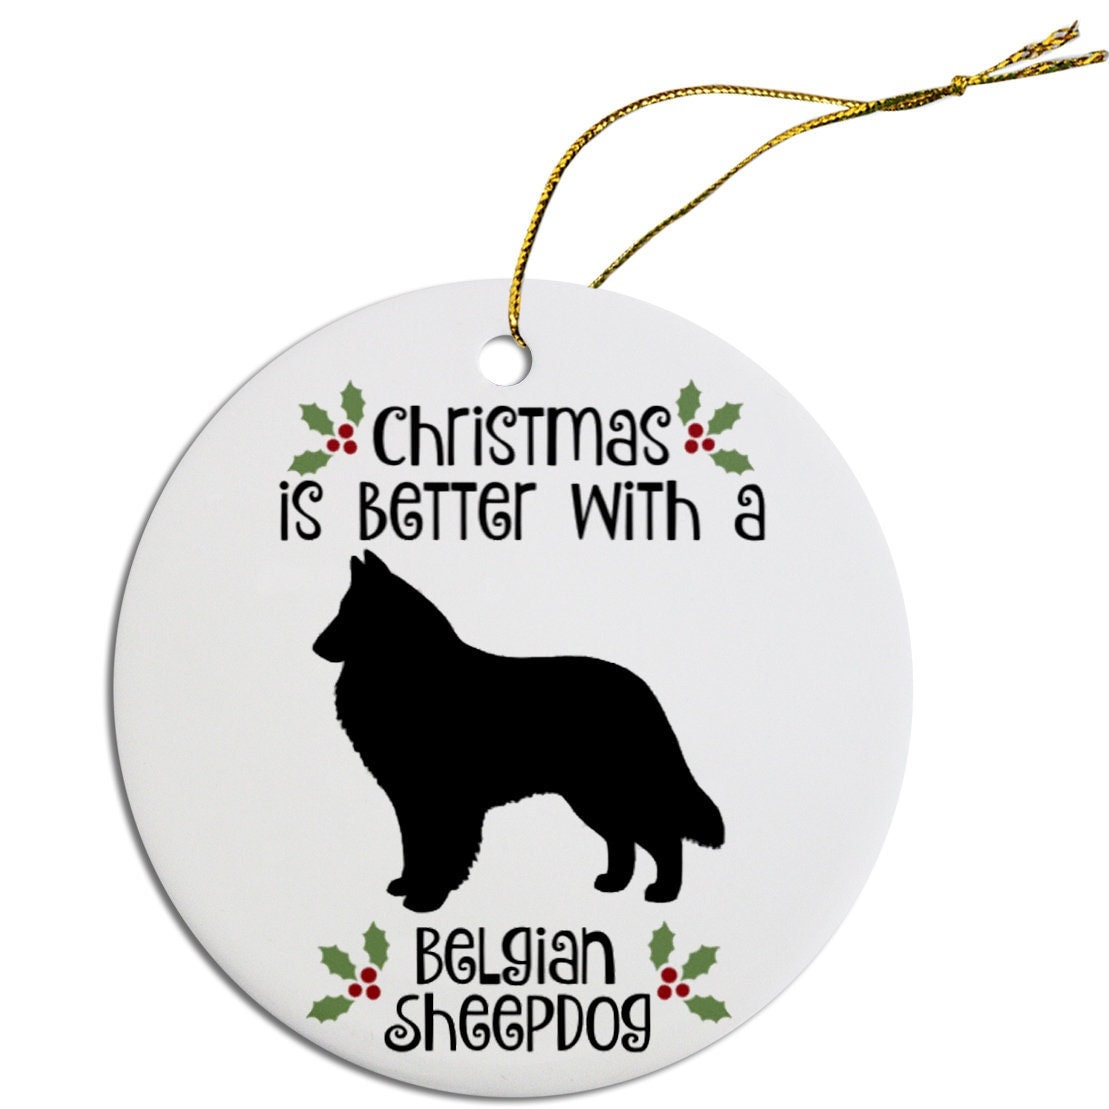 Dog Breed Specific Round Christmas Ornament, "Belgian Sheepdog"